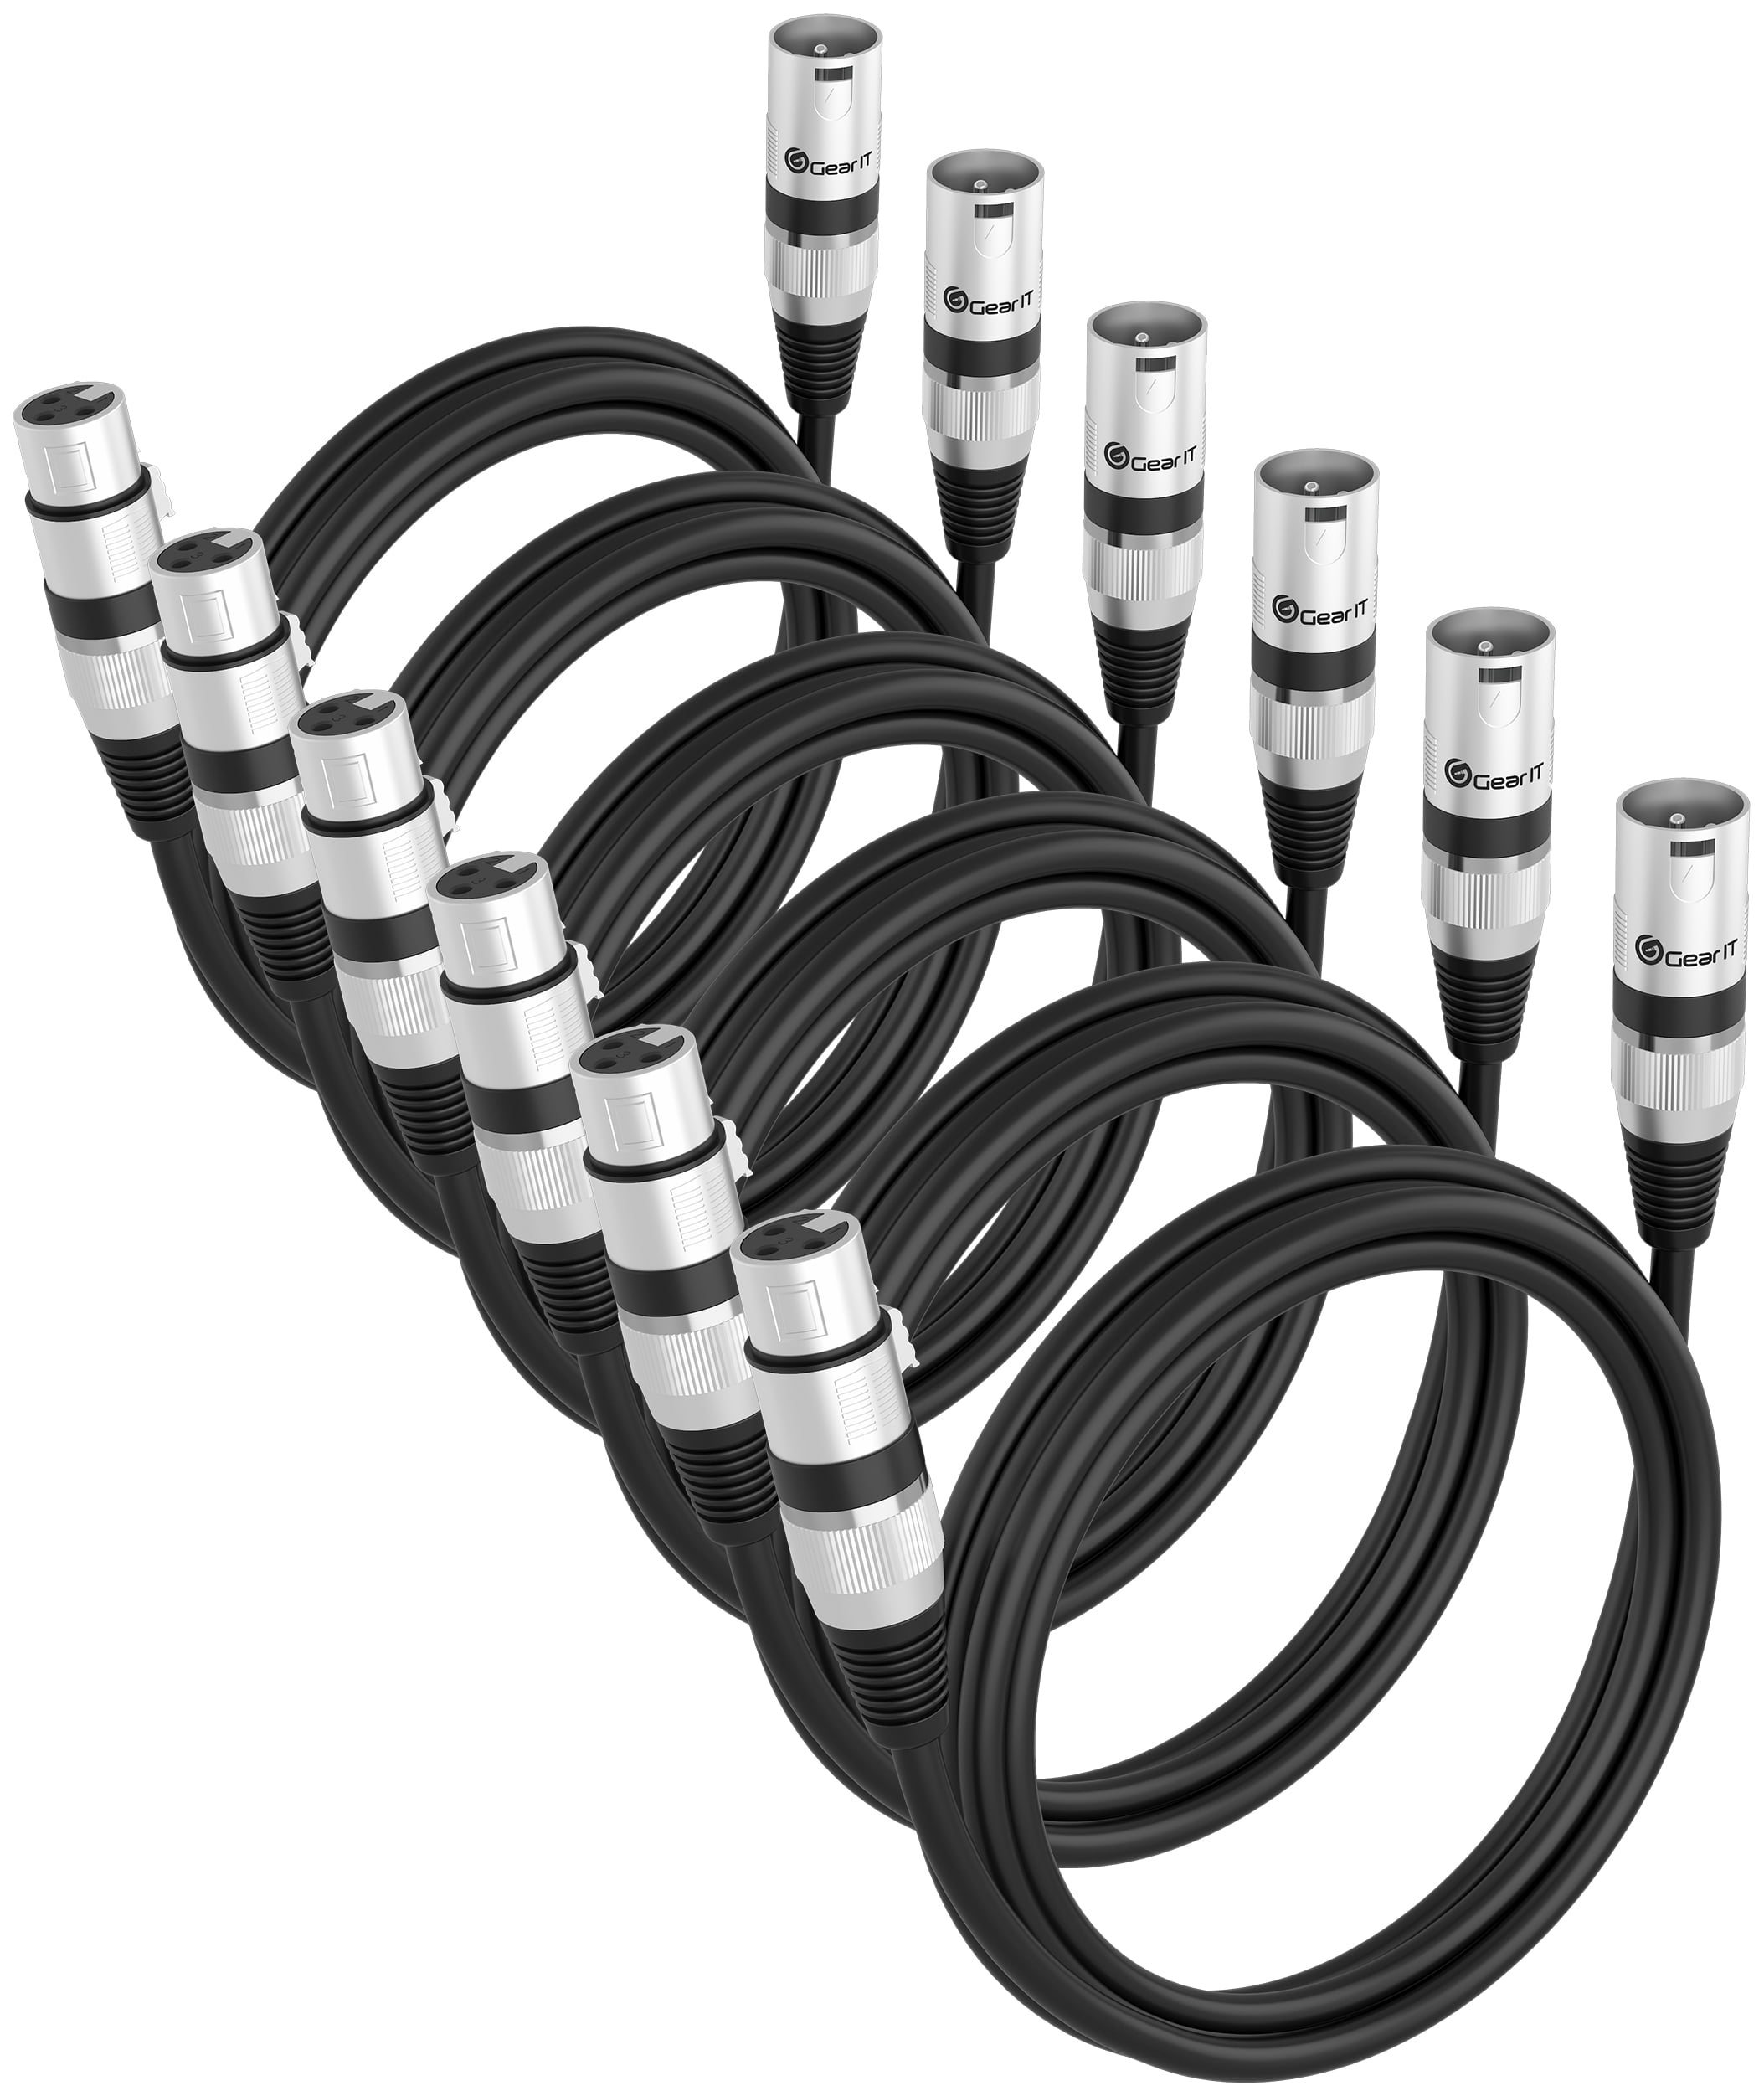 Gearit Xlr To Xlr Microphone Cable 20 Feet 6 Pack Xlr Male To Female Mic Cable 3 Pin Balanced 